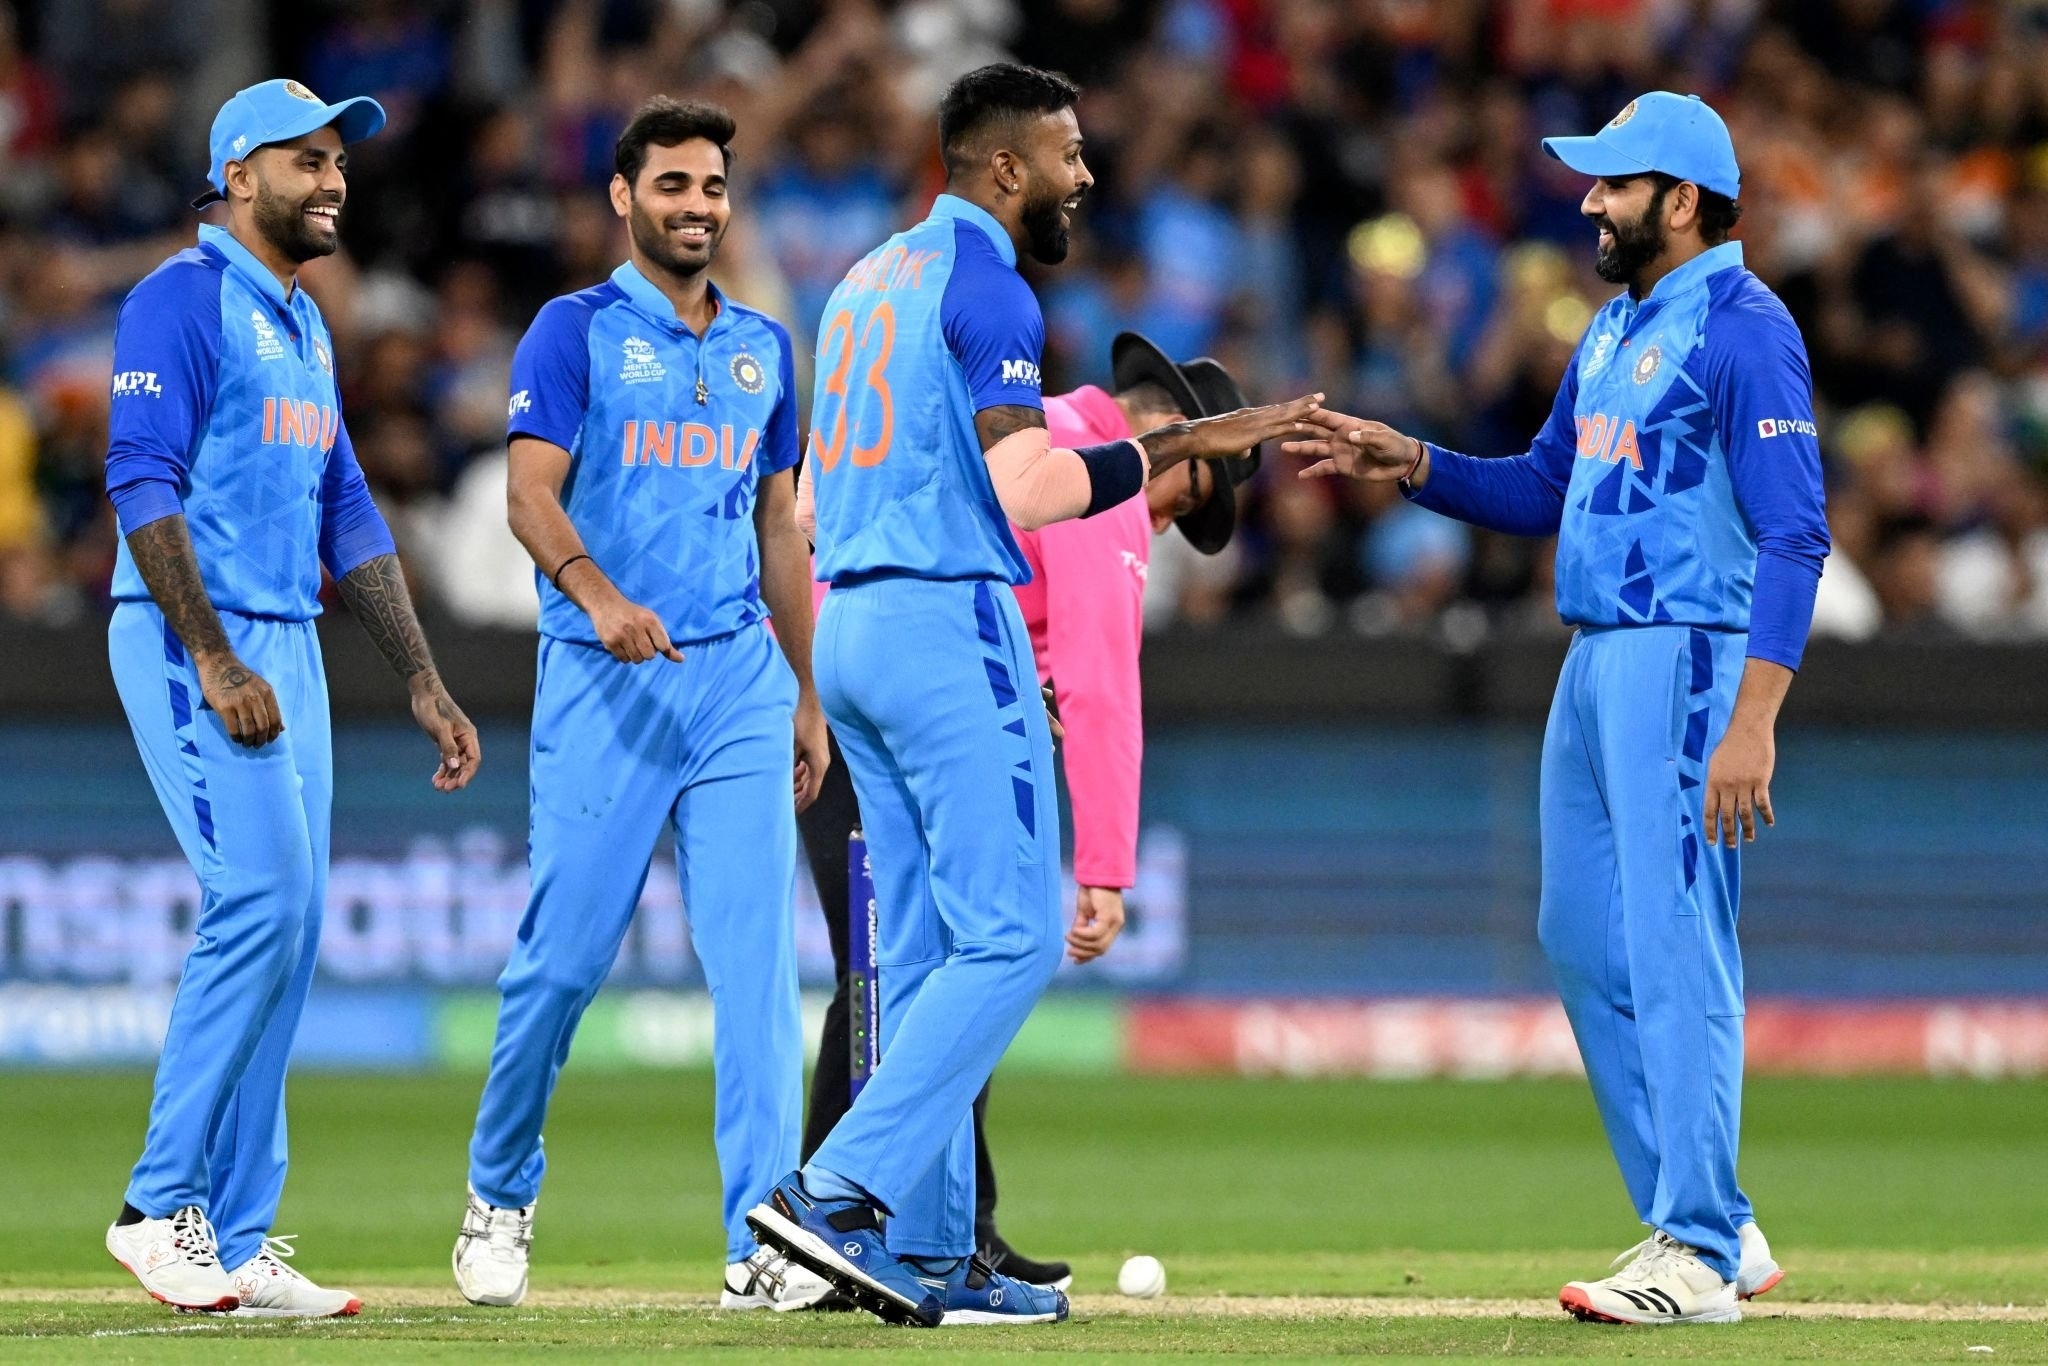 India T20 Captaincy, BCCI, Rohit Sharma, India T20 captain, Hardik Pandya, T20 WC 2024, ICC T20 World Cup 2022, IND ENG Semifinal, IND vs NZ T20 Series